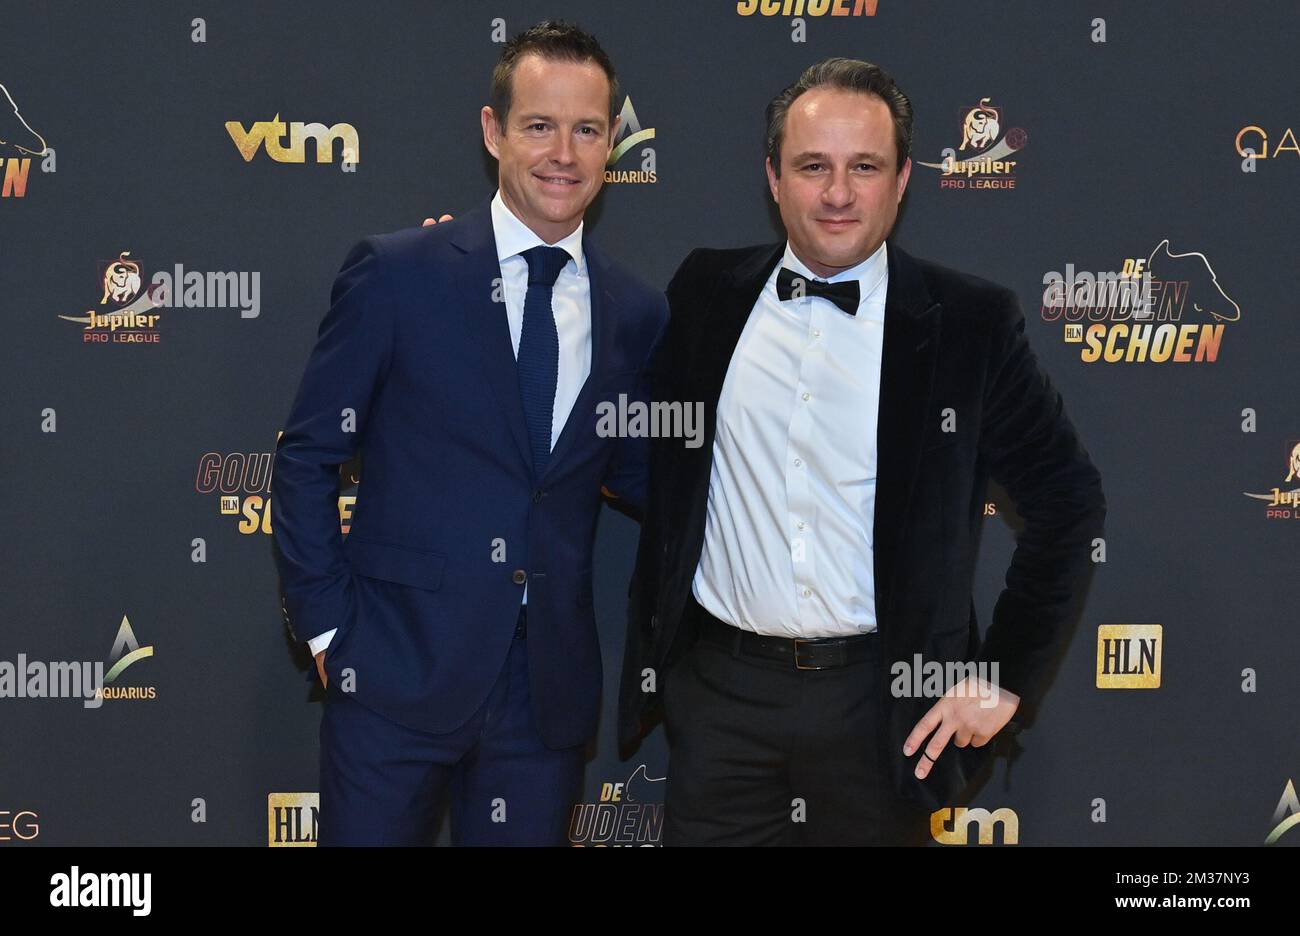 Gilles De Bilde (L) pictured on the red carpet at the arrival for the 68th edition of the 'Golden Shoe' award ceremony, Wednesday 12 January 2022, in Puurs. The Golden Shoe (Gouden Schoen / Soulier d'Or) is an award for the best soccer player of the Belgian Jupiler Pro League championship during the calender year 2019. BELGA PHOTO DIRK WAEM Stock Photo